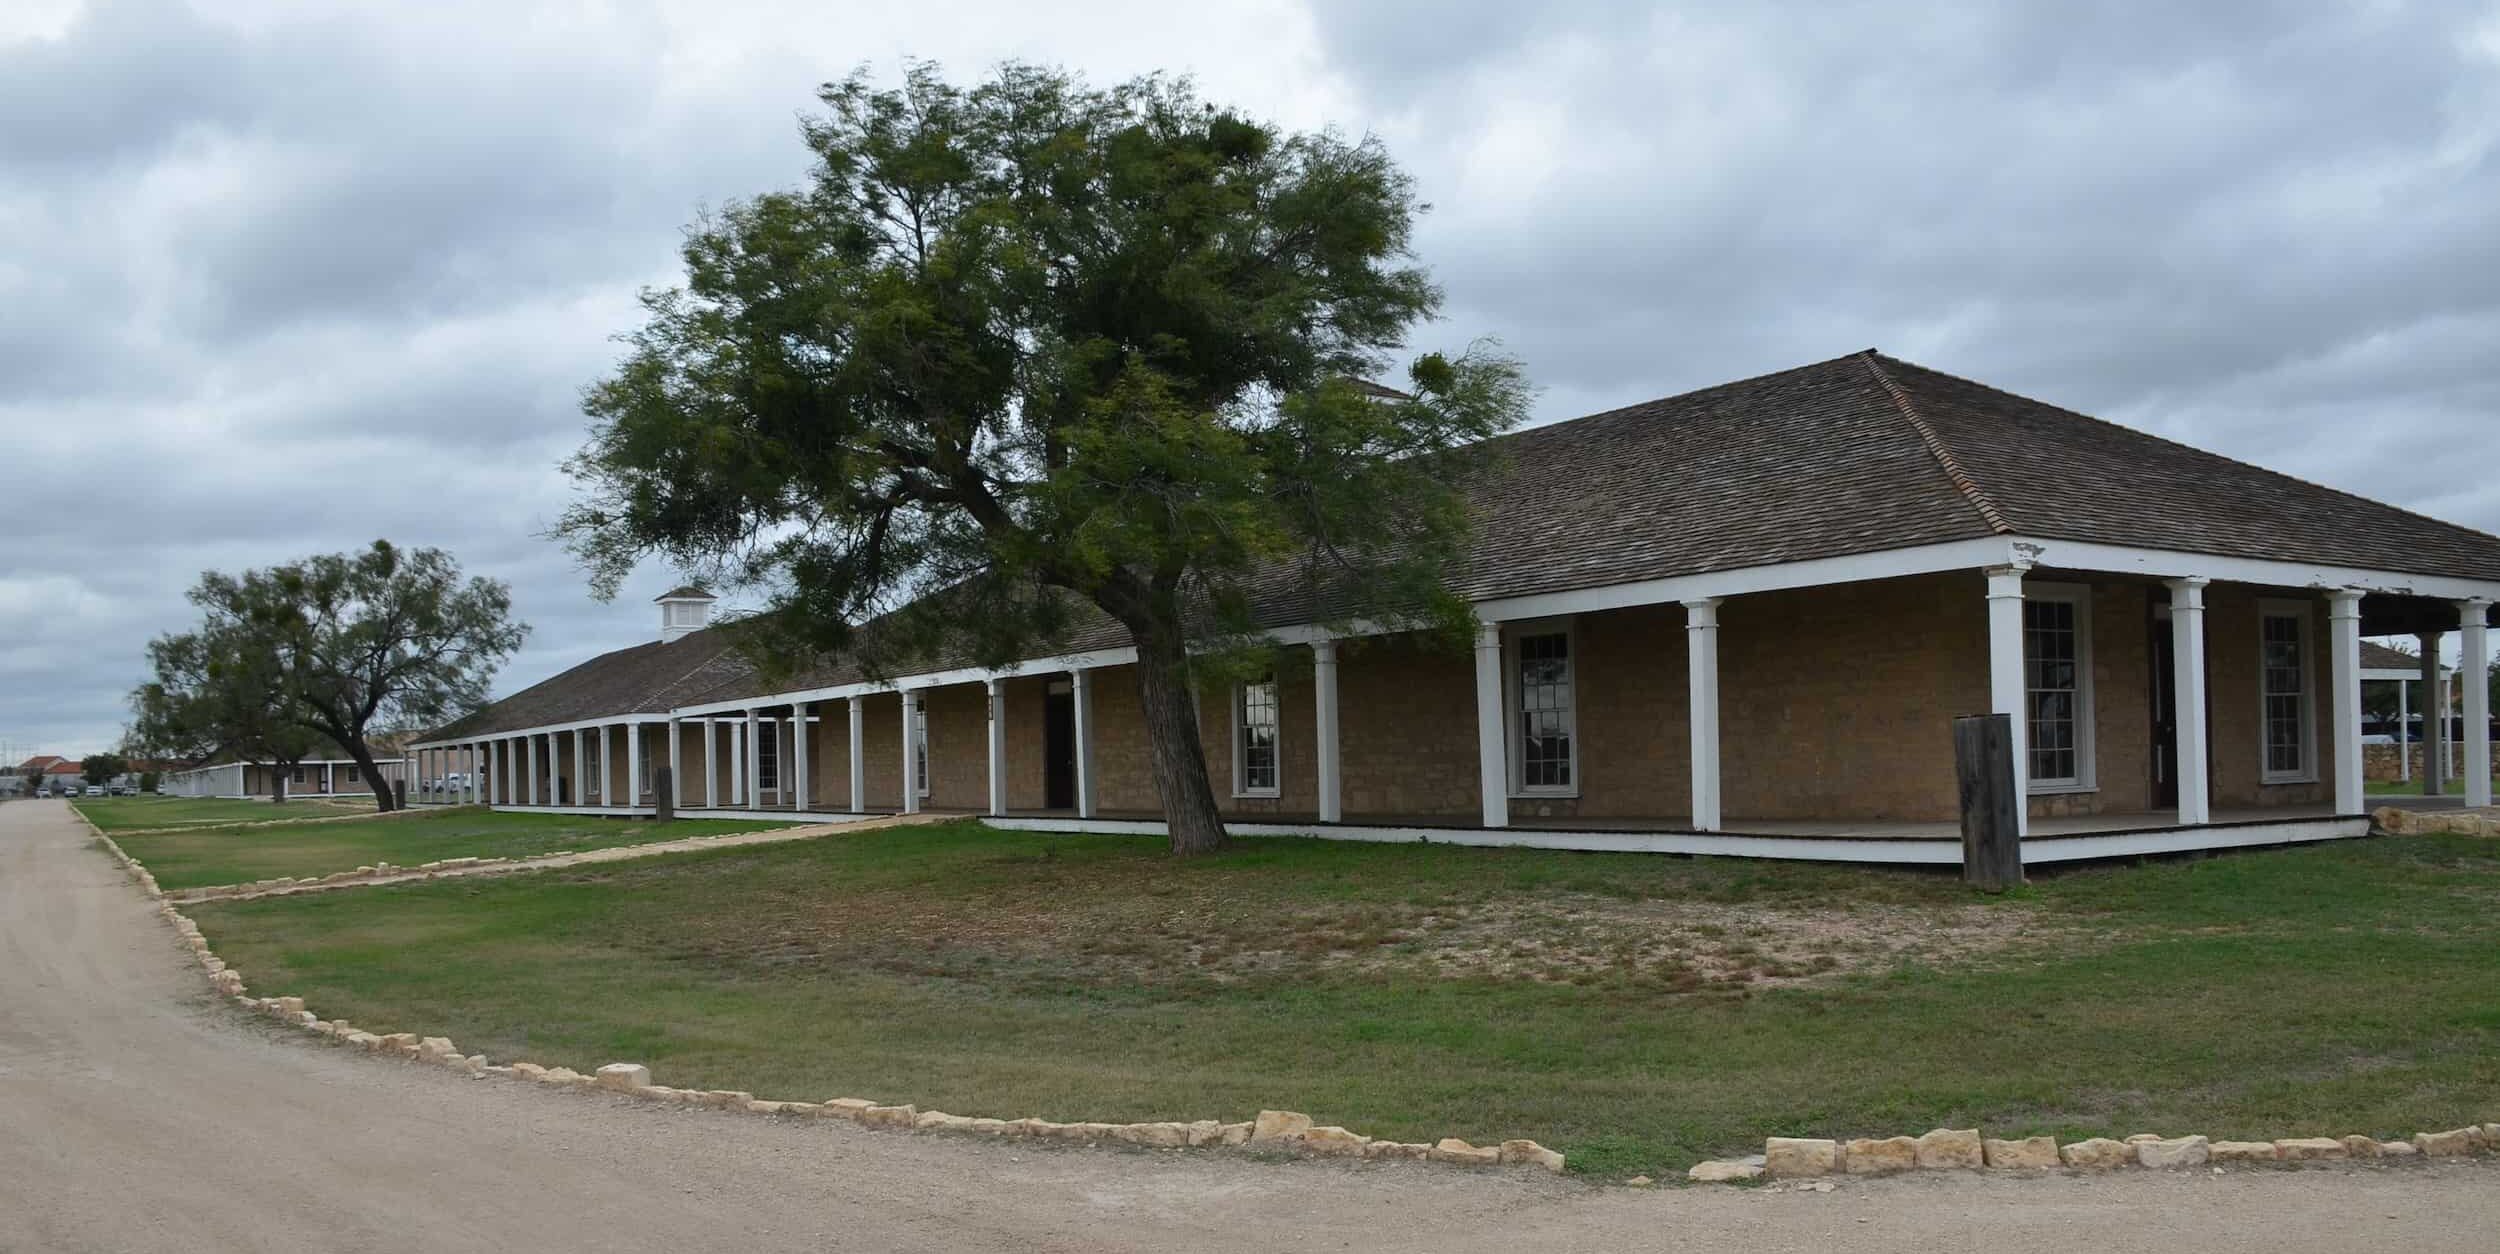 Enlisted Men's Barracks #5 (left) and #6 (right) at Fort Concho in San Angelo, Texas